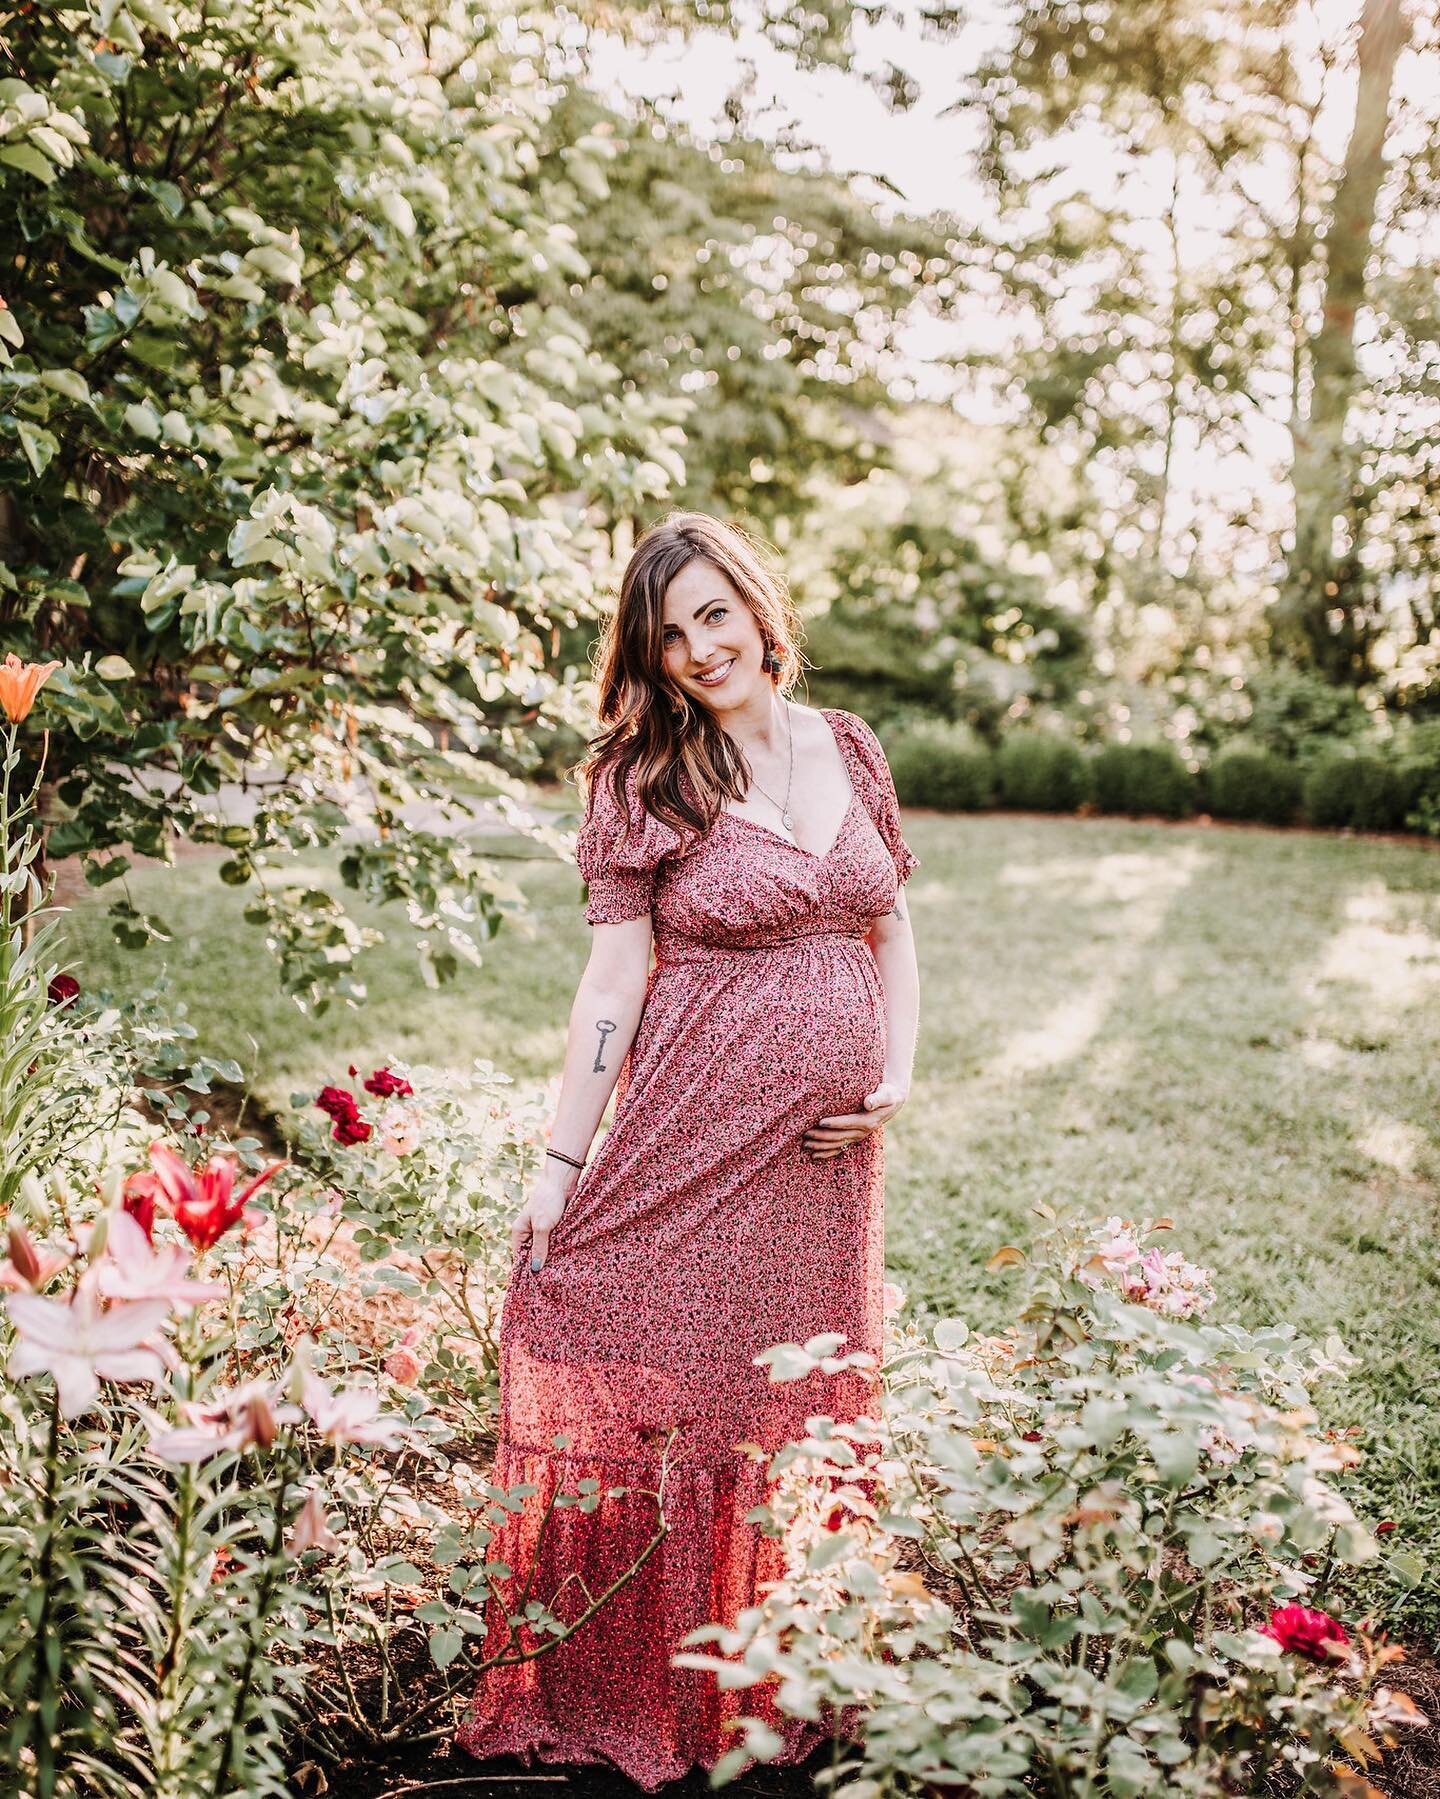 Looking magazine cover worthy and absolutely stunning growing a life inside her. Walker party of three coming very soon!